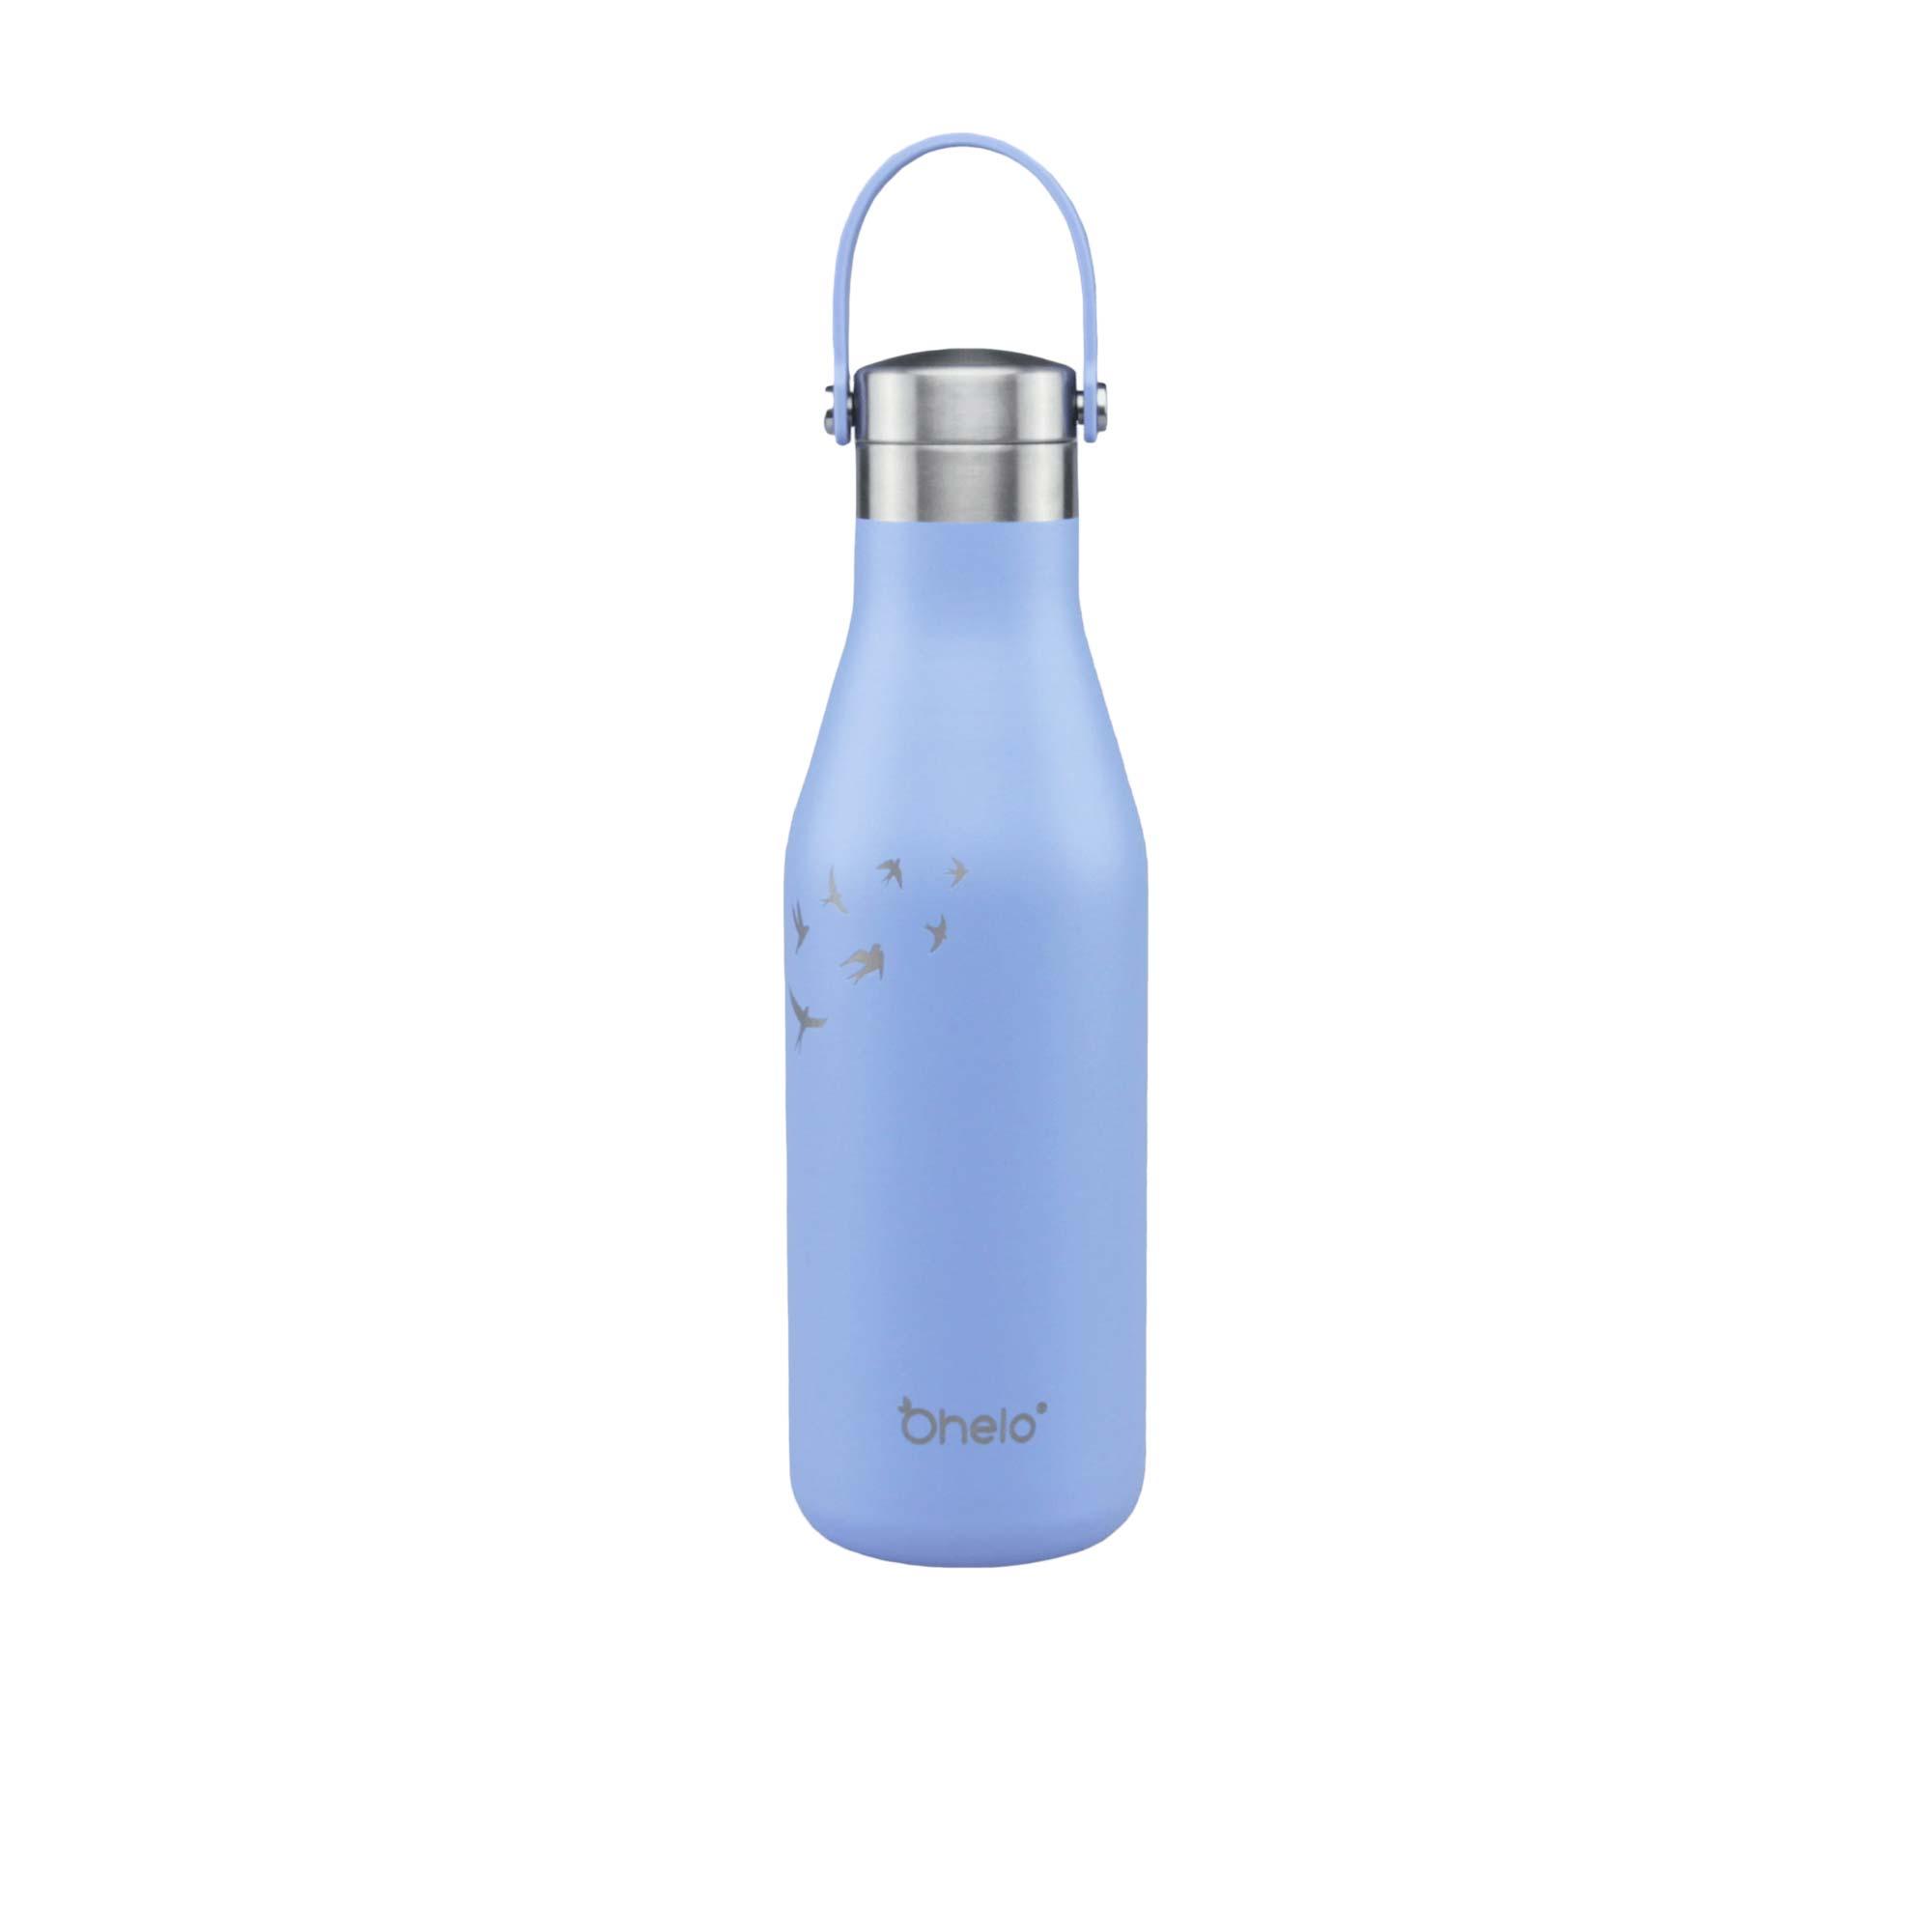 Ohelo Insulated Drink Bottle 500ml Blue Image 1